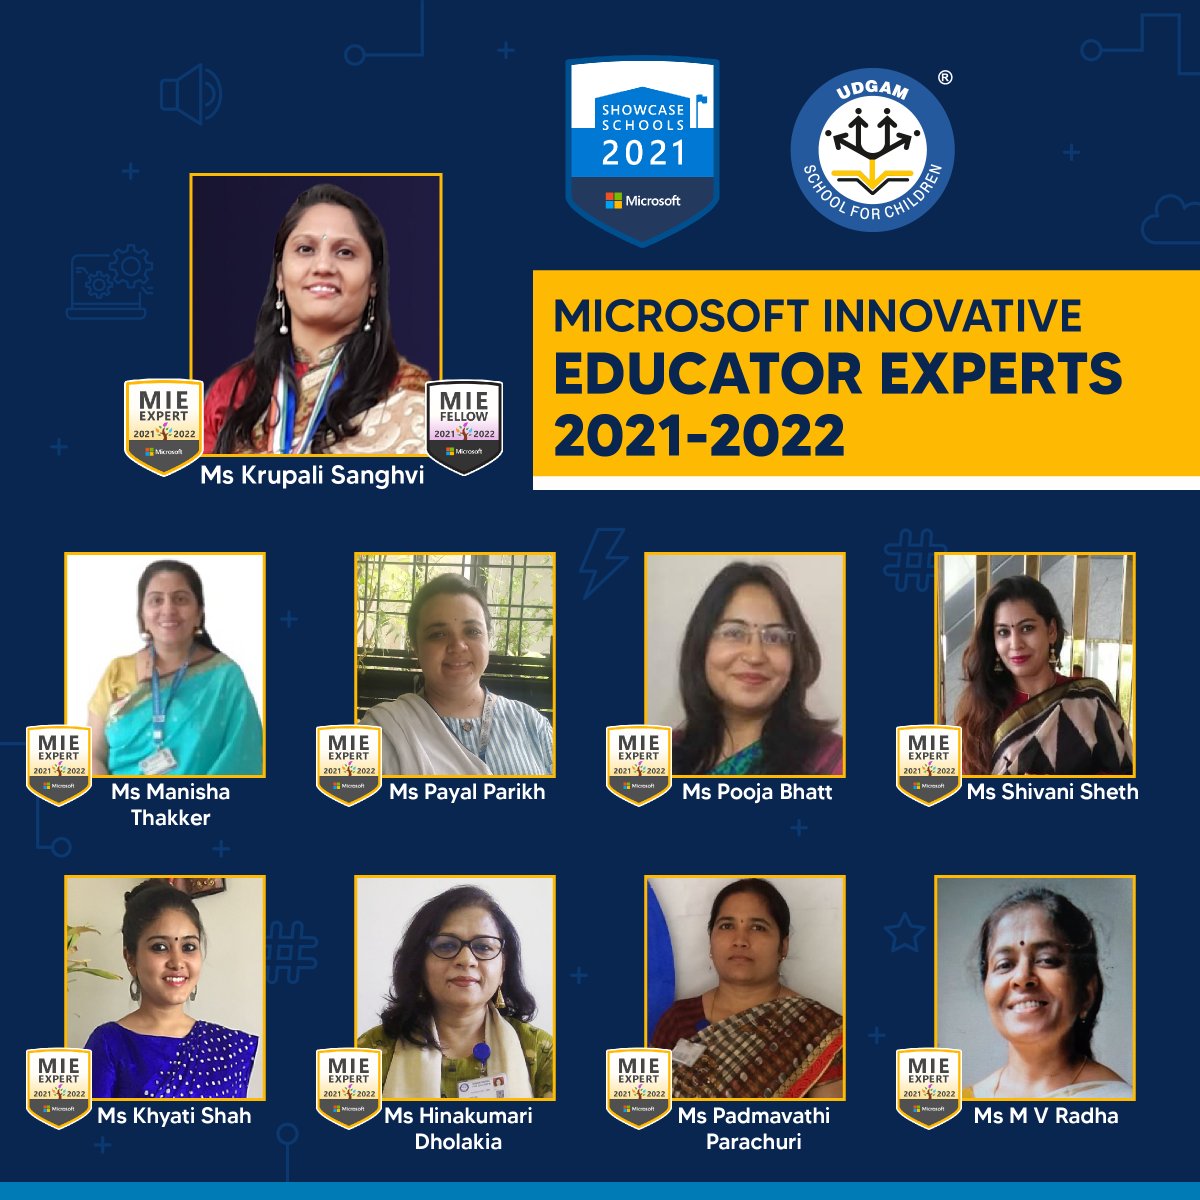 A glorious moment! #Microsoft has recognized us as a #ShowcaseSchool yet again this year. 
We can not be prouder as we are among those few elite groups of schools that exemplify the best of teaching and learning in the world today.

#showcase #schools #MicrosoftShowcaseSchools